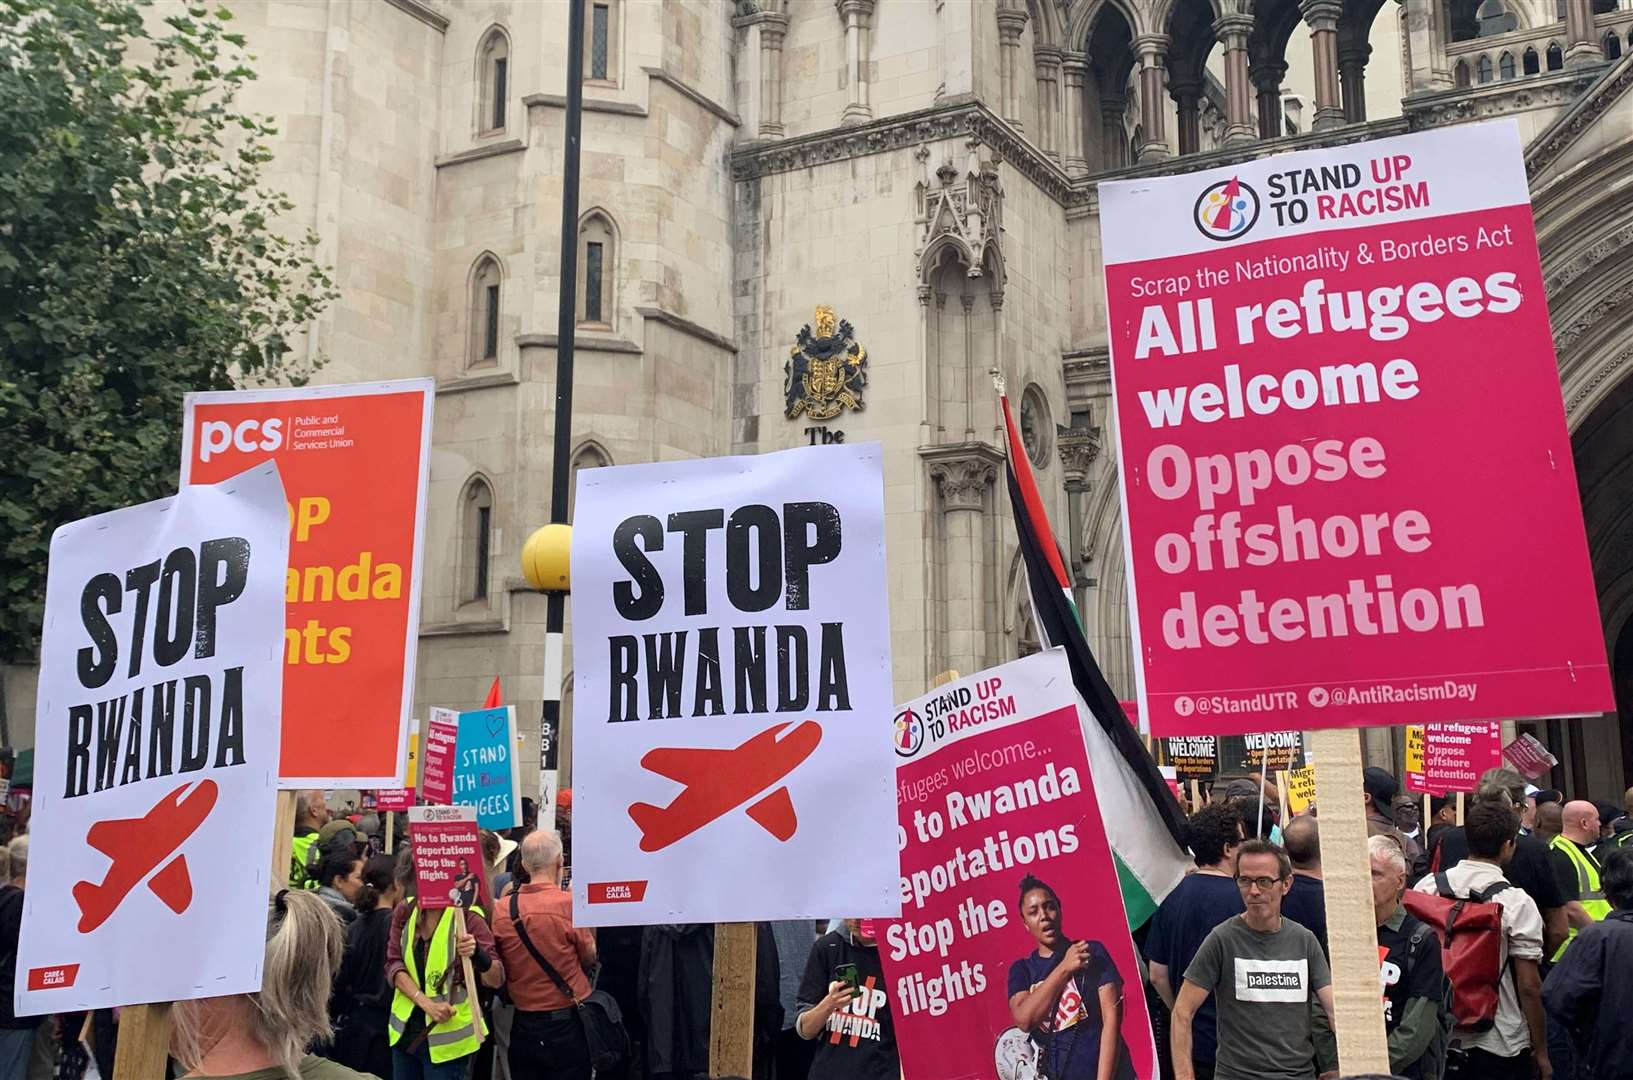 Demonstrators outside the Royal Courts of Justice, central London, protesting against the Government’s plan to send some asylum seekers to Rwanda, which the High Court has now ruled as lawful (PA)